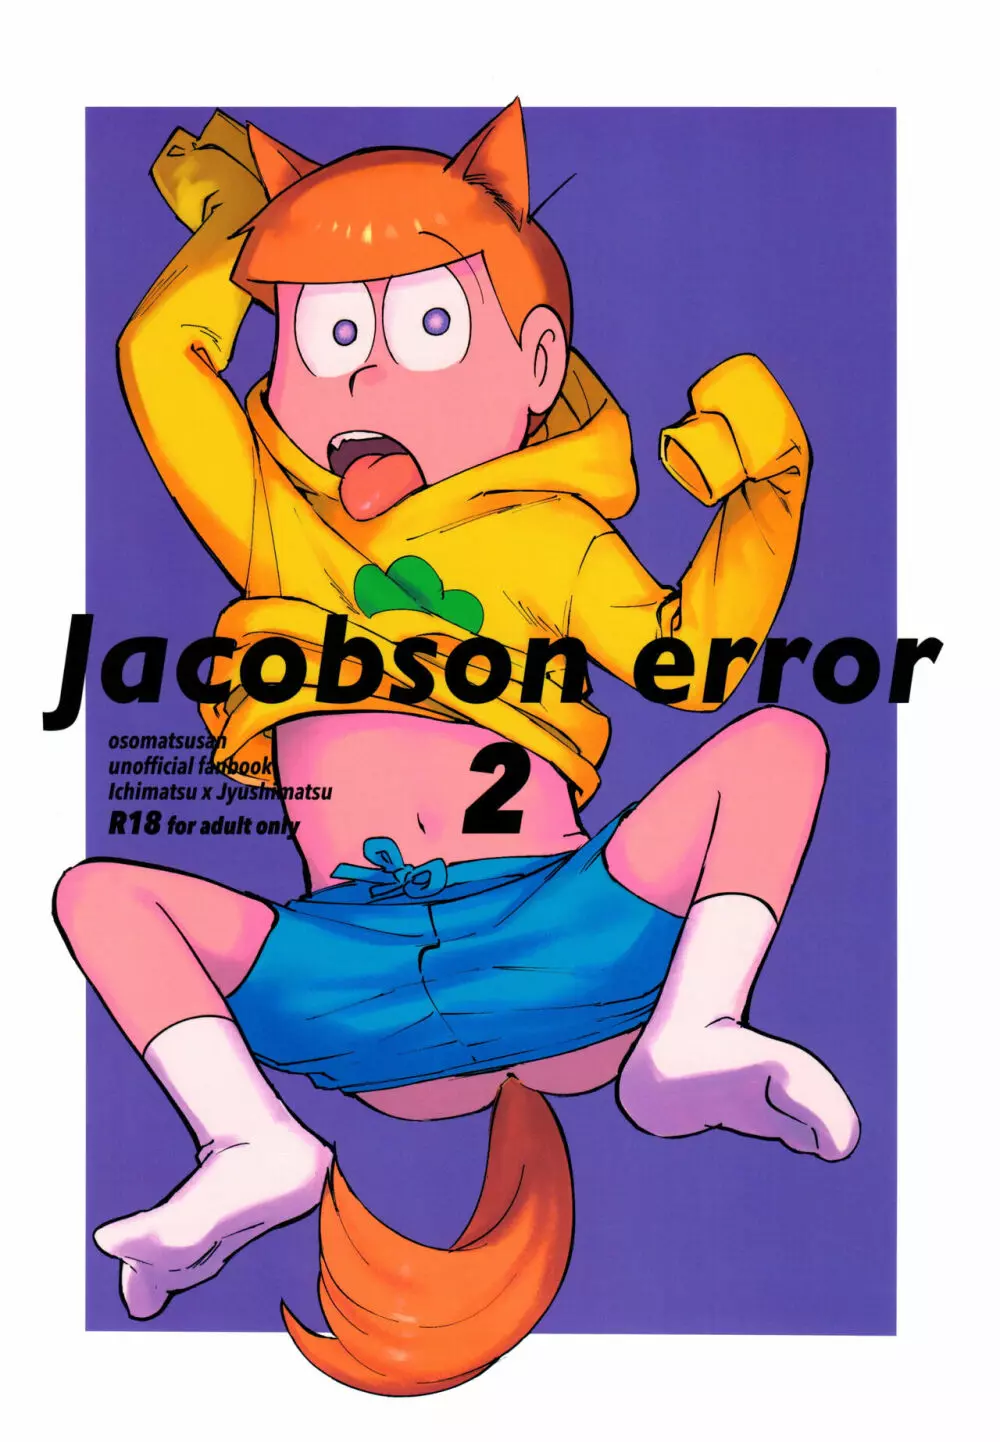 jacobson error2 - page1